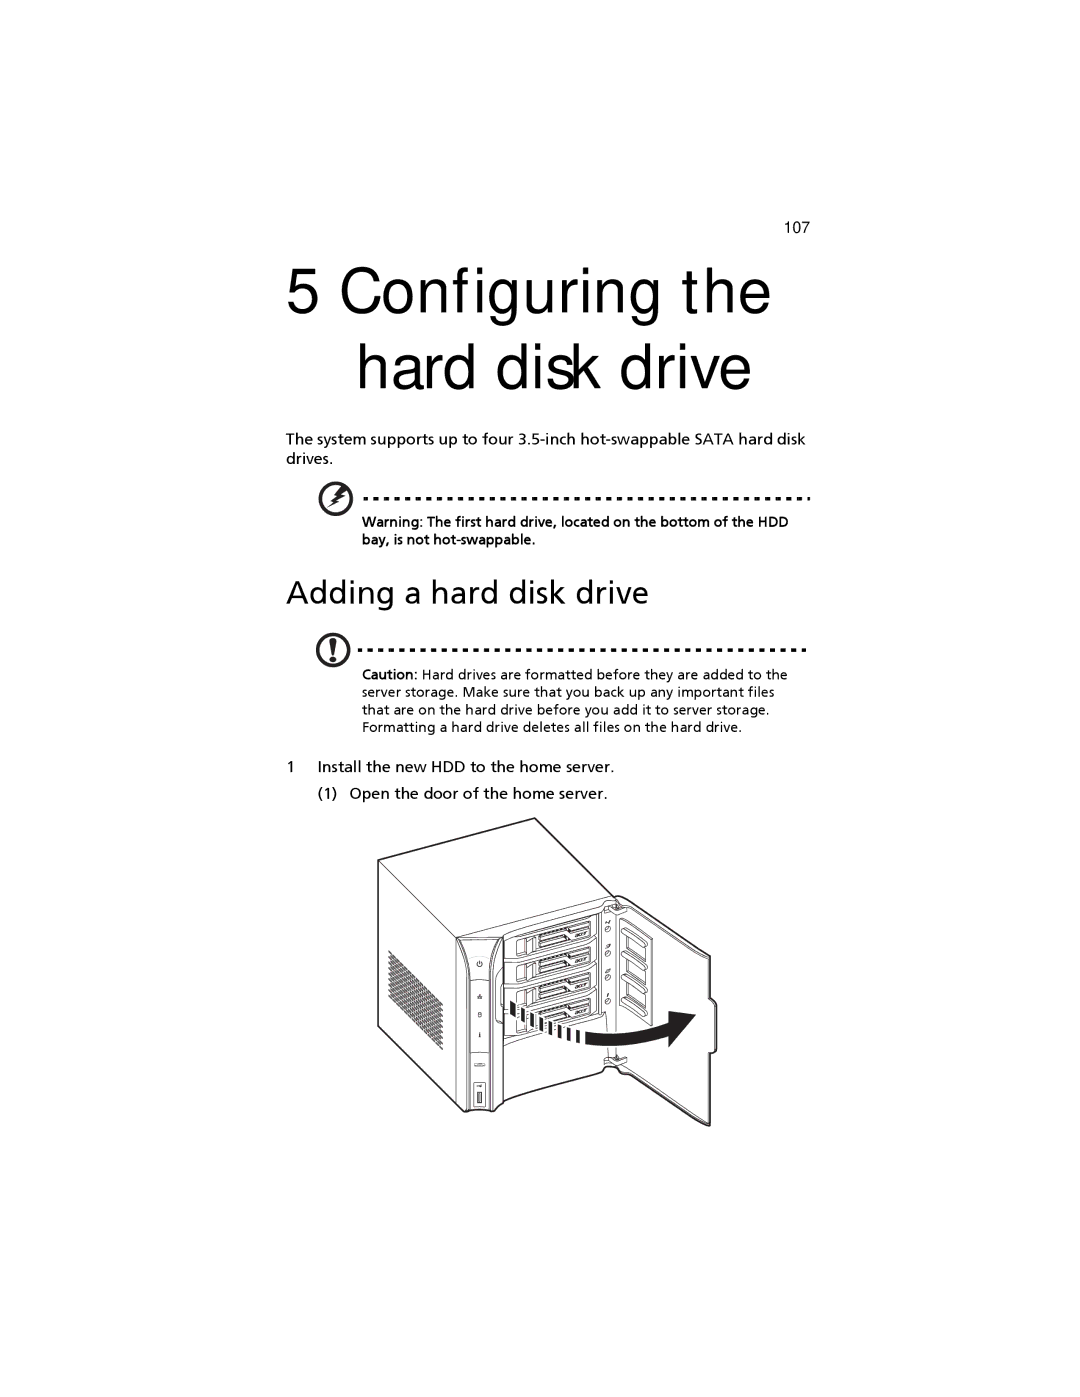 Acer easyStore H340 manual Configuring the hard disk drive, Adding a hard disk drive 